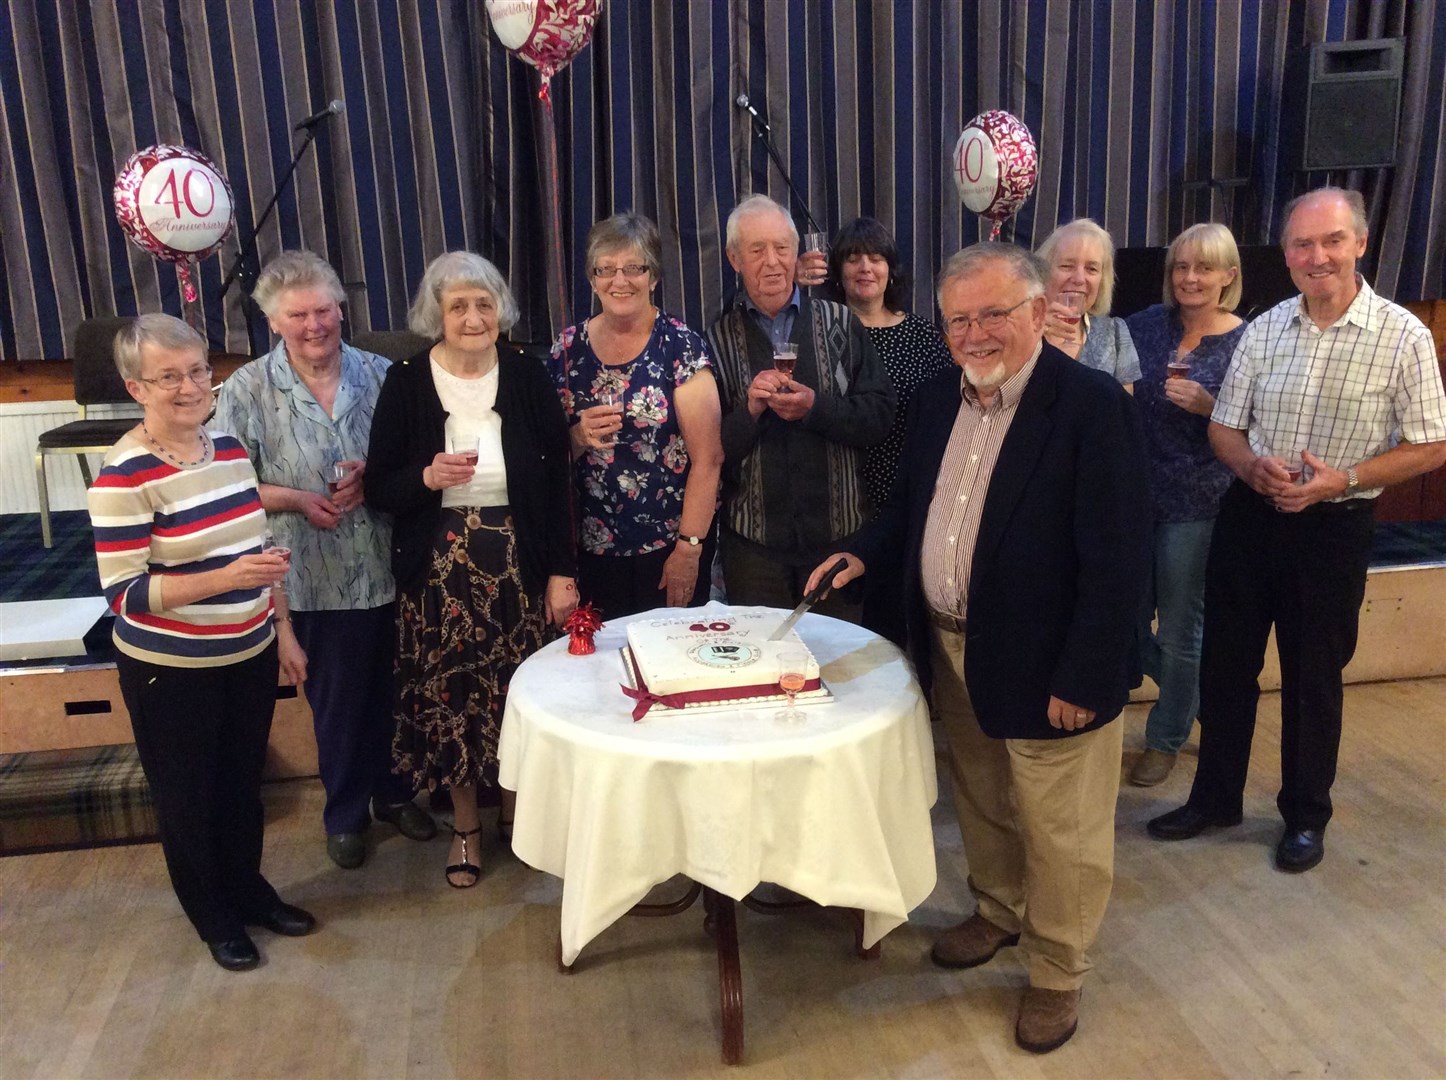 Dingwall & District Accordion & Fiddle Club's chairman Hamish MacLennan cuts a cake to celebrate the group's 40th anniversary at The National Hotel.